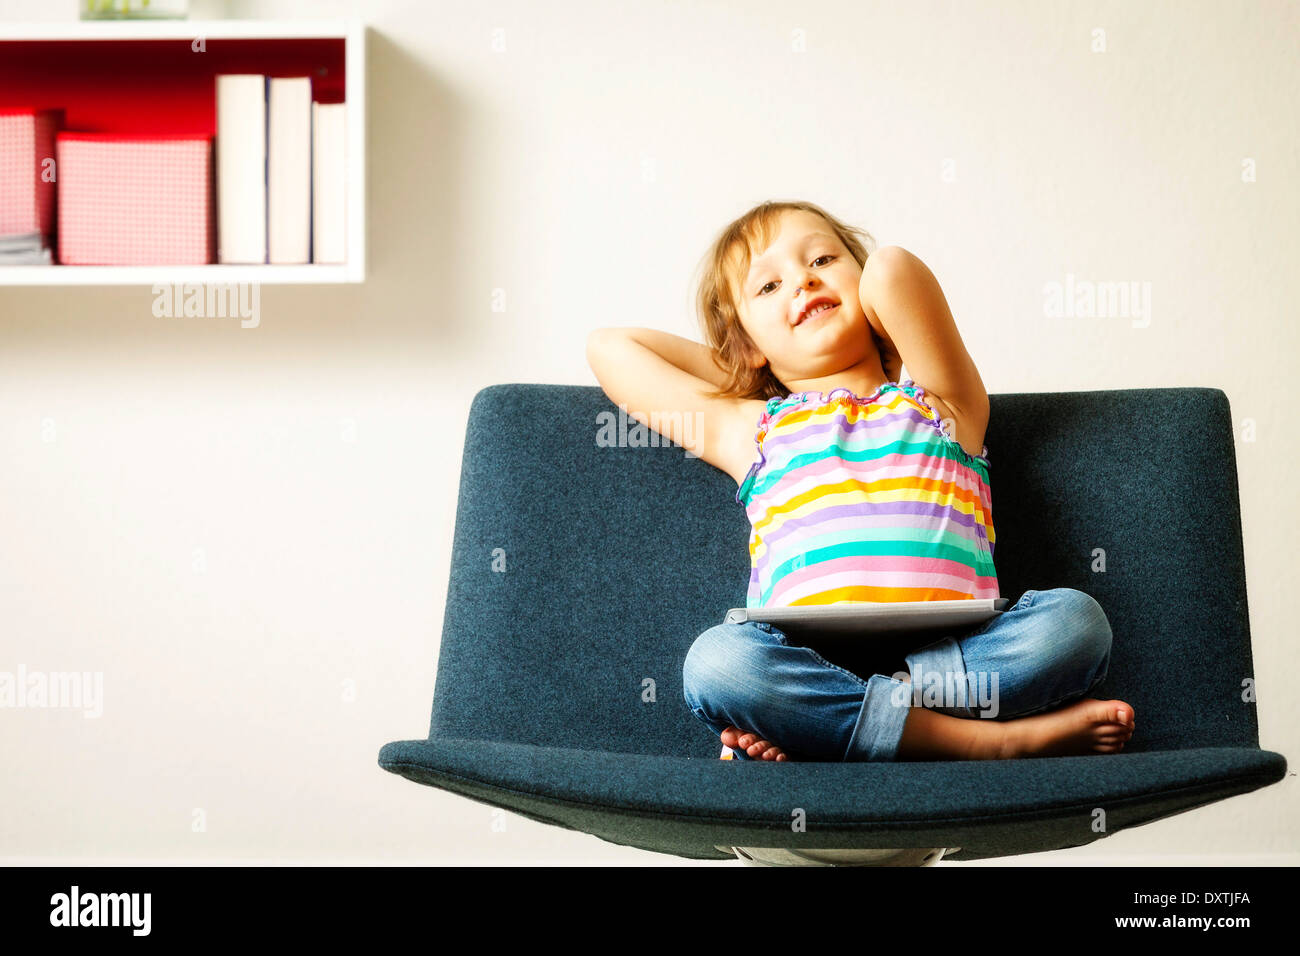 Girl sits in chair using tablet computer, Munich, Bavaria, Germany Stock Photo